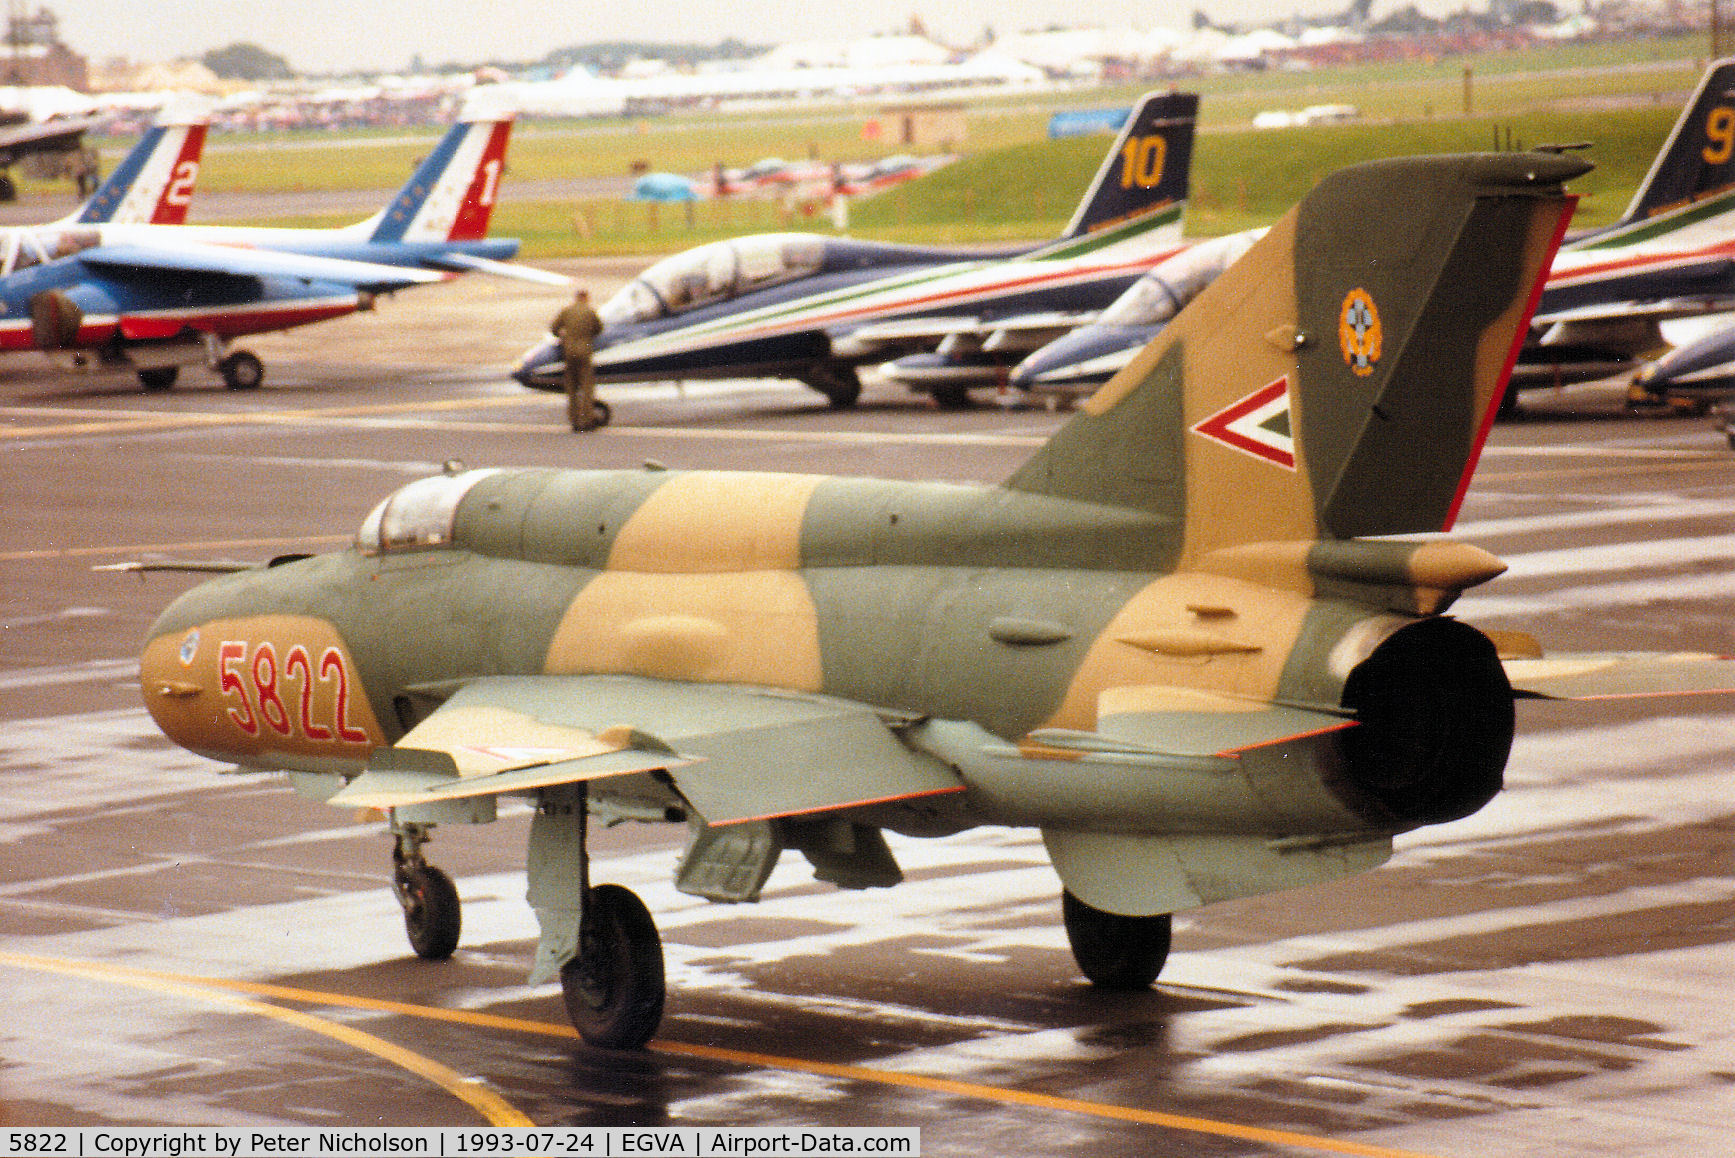 5822, Mikoyan-Gurevich MiG-21bis C/N 75035822, Another view of this MiG-21 Fishbed of the Hungarian Air Force's Sky Hussars display team at the 1993 Intnl Air Tattoo at RAF Fairford.